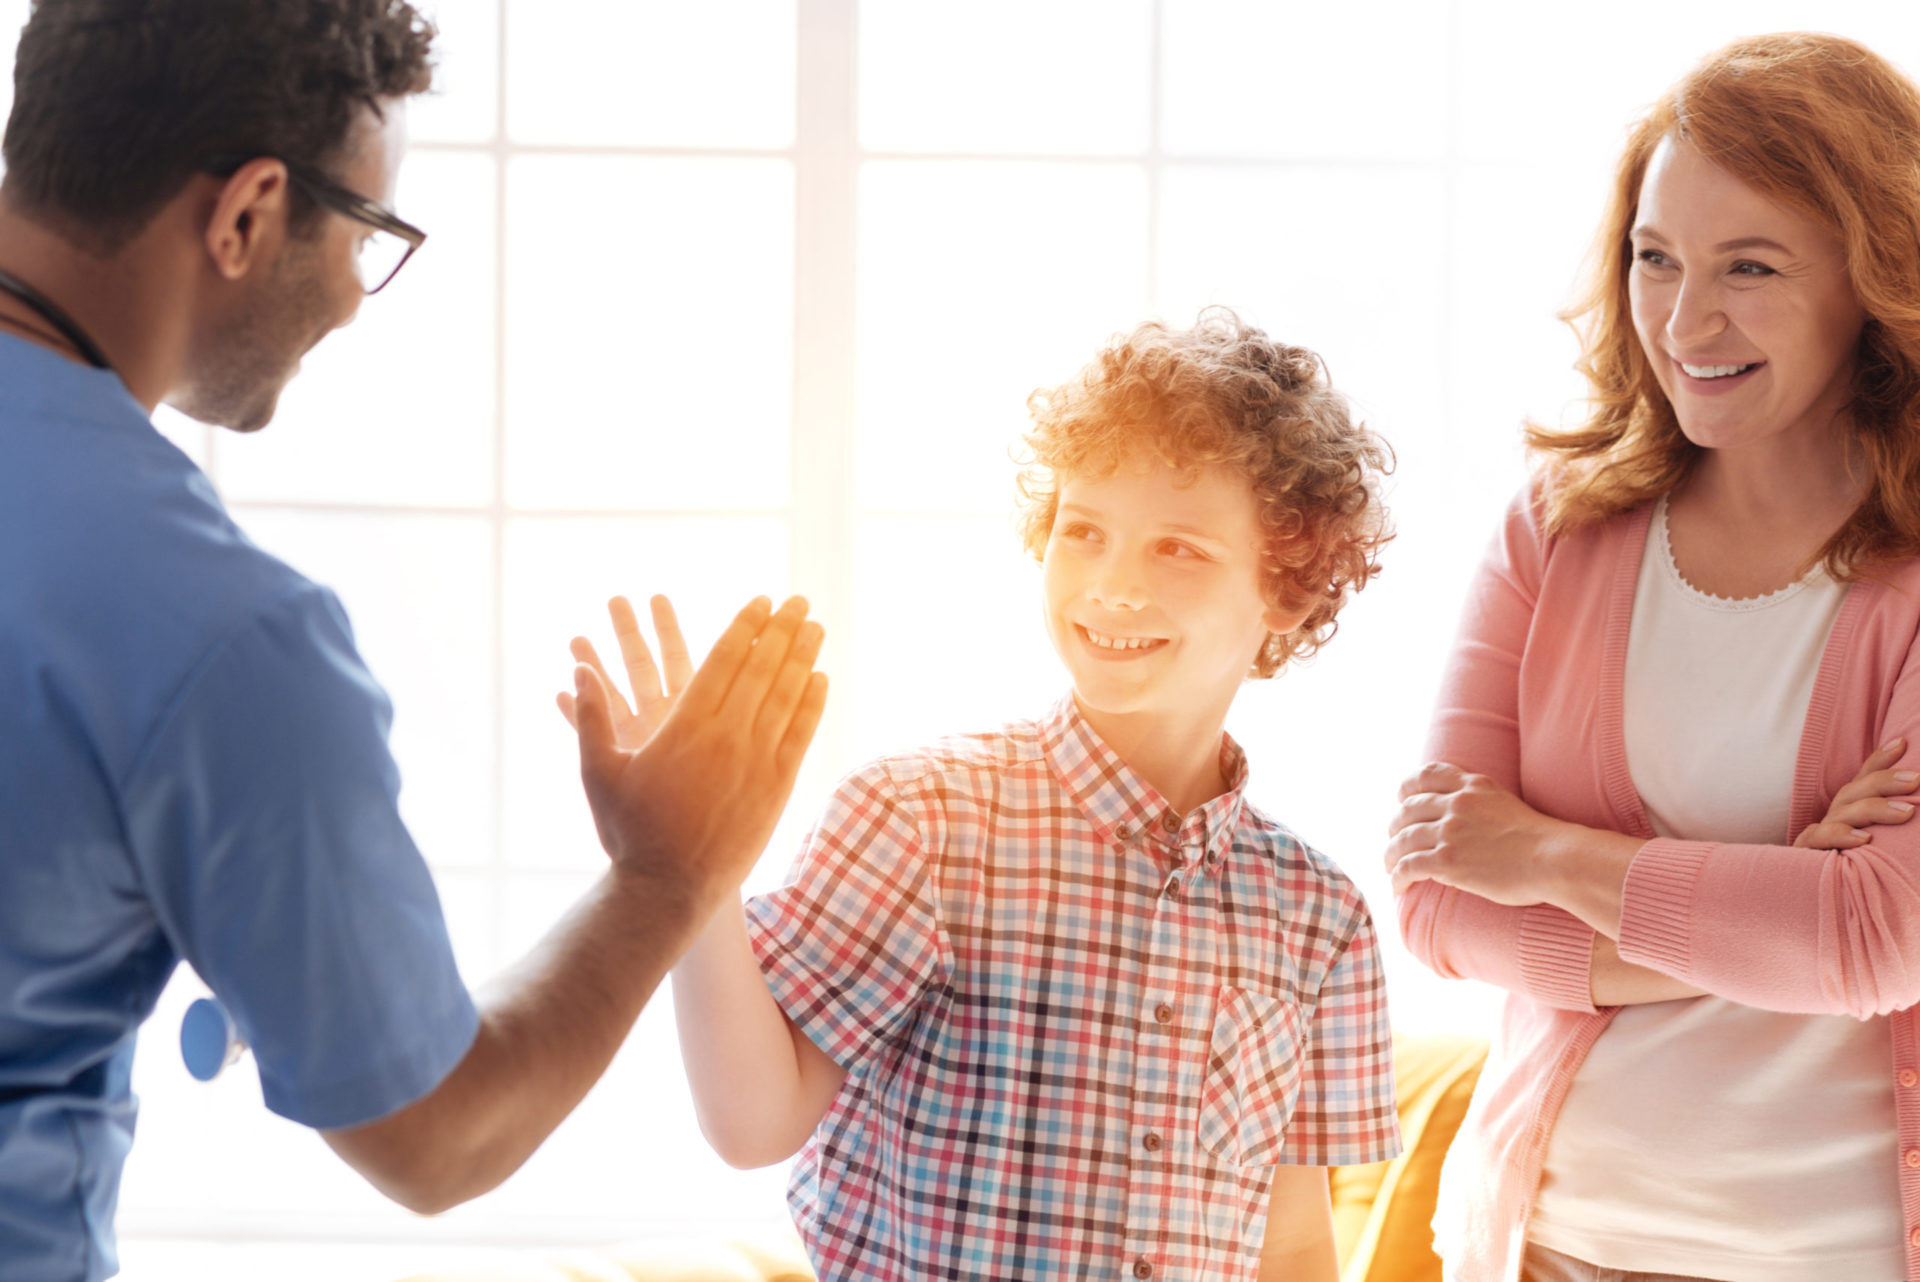 Kid high-fives his doctor at a doctor visit while his mom looks on, smiling